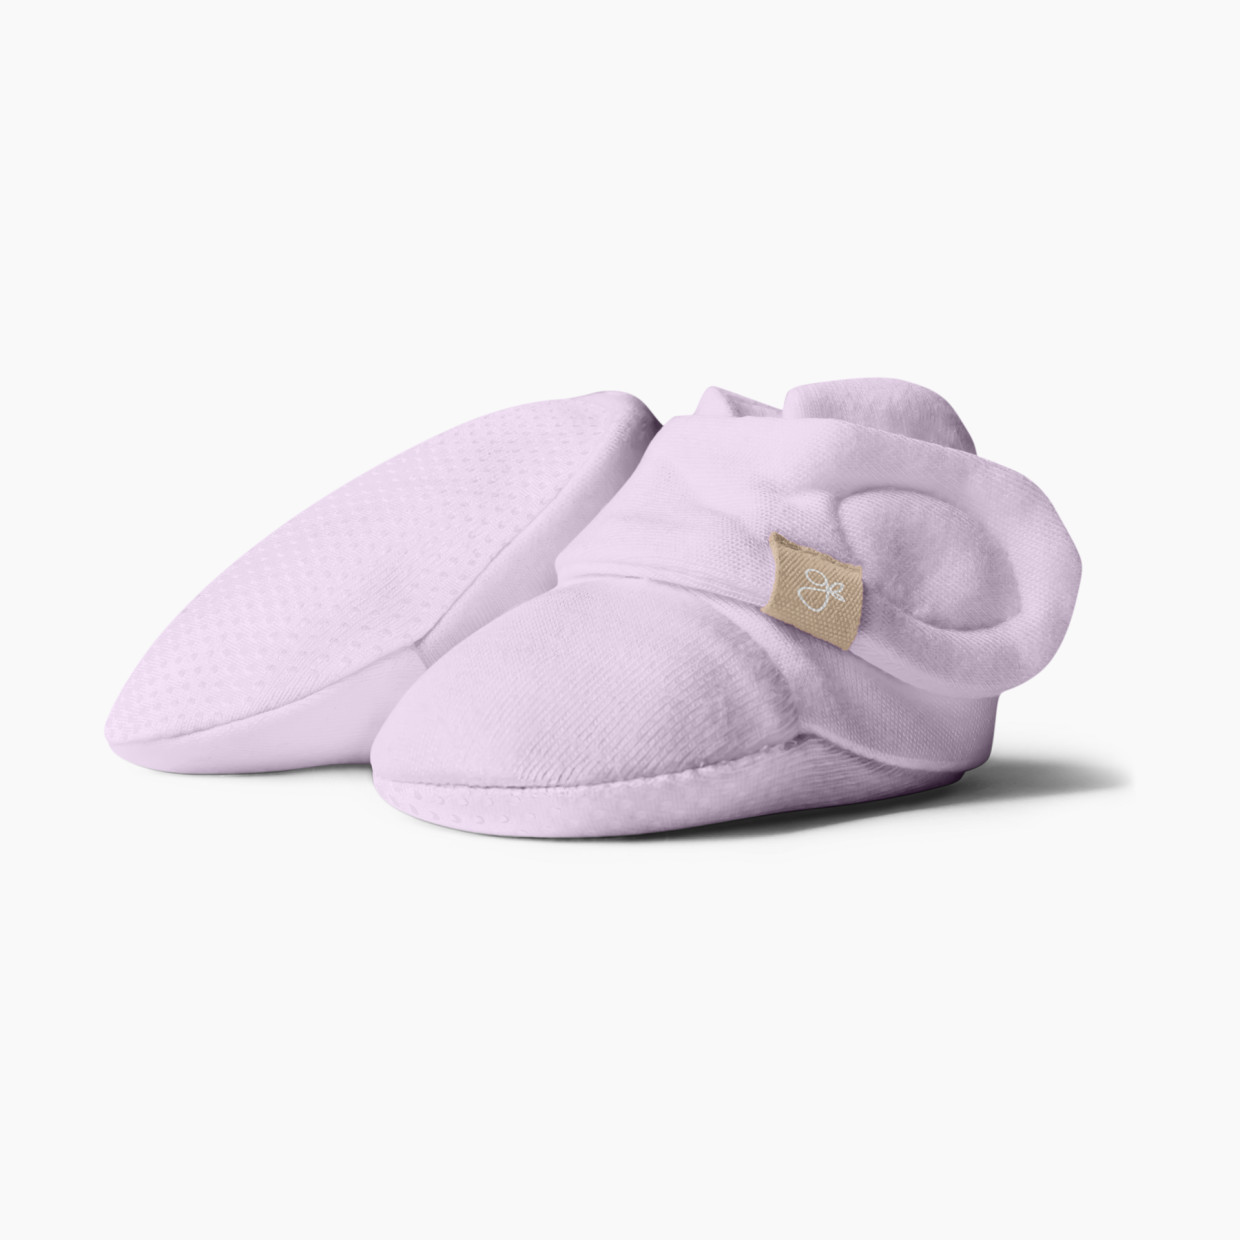 Goumi Kids x Babylist Stay On Baby Boots - Lilac, 0-3 M.